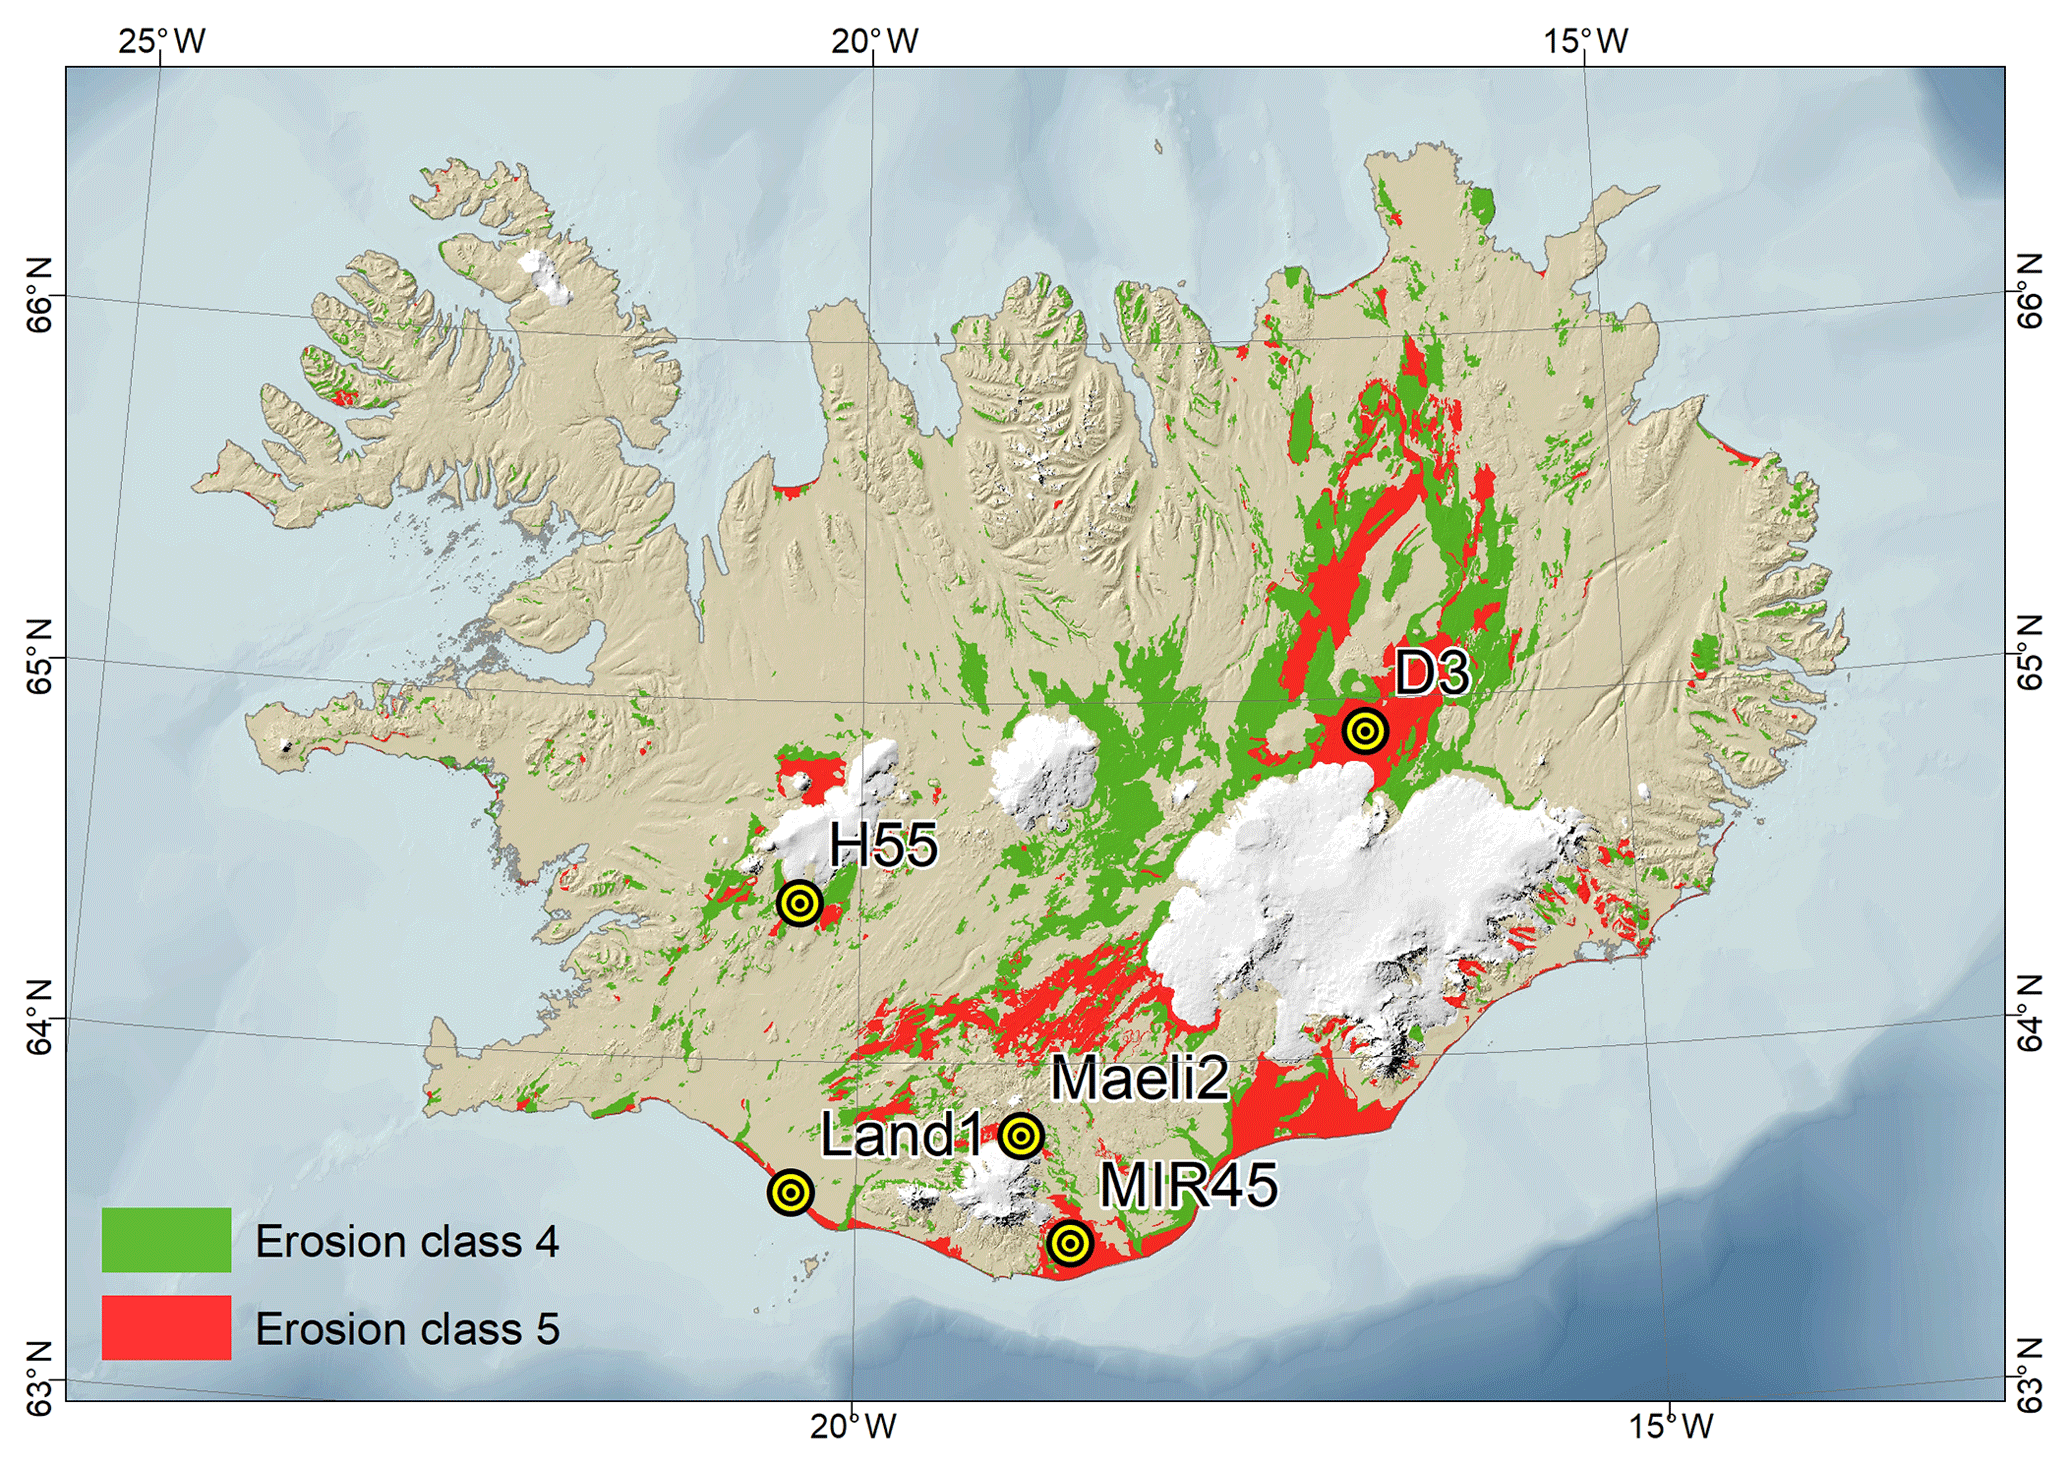 Surface sediment sampling sites and major dust hotspots. D3, Dyngjusandur hotspot; H55, Hagavatn hotspot; Land1, Landeyjarsandur; Maeli2, Mælifellssandur; MIR45, Mýrdalssandur. In green are the unstable sandy areas. In red are the very unstable sandy areas. Note that the map was prepared by Ólafur Arnalds using data created and owned by him at the Agricultural University of Iceland, older works (database housed by the Agricultural University of Iceland).